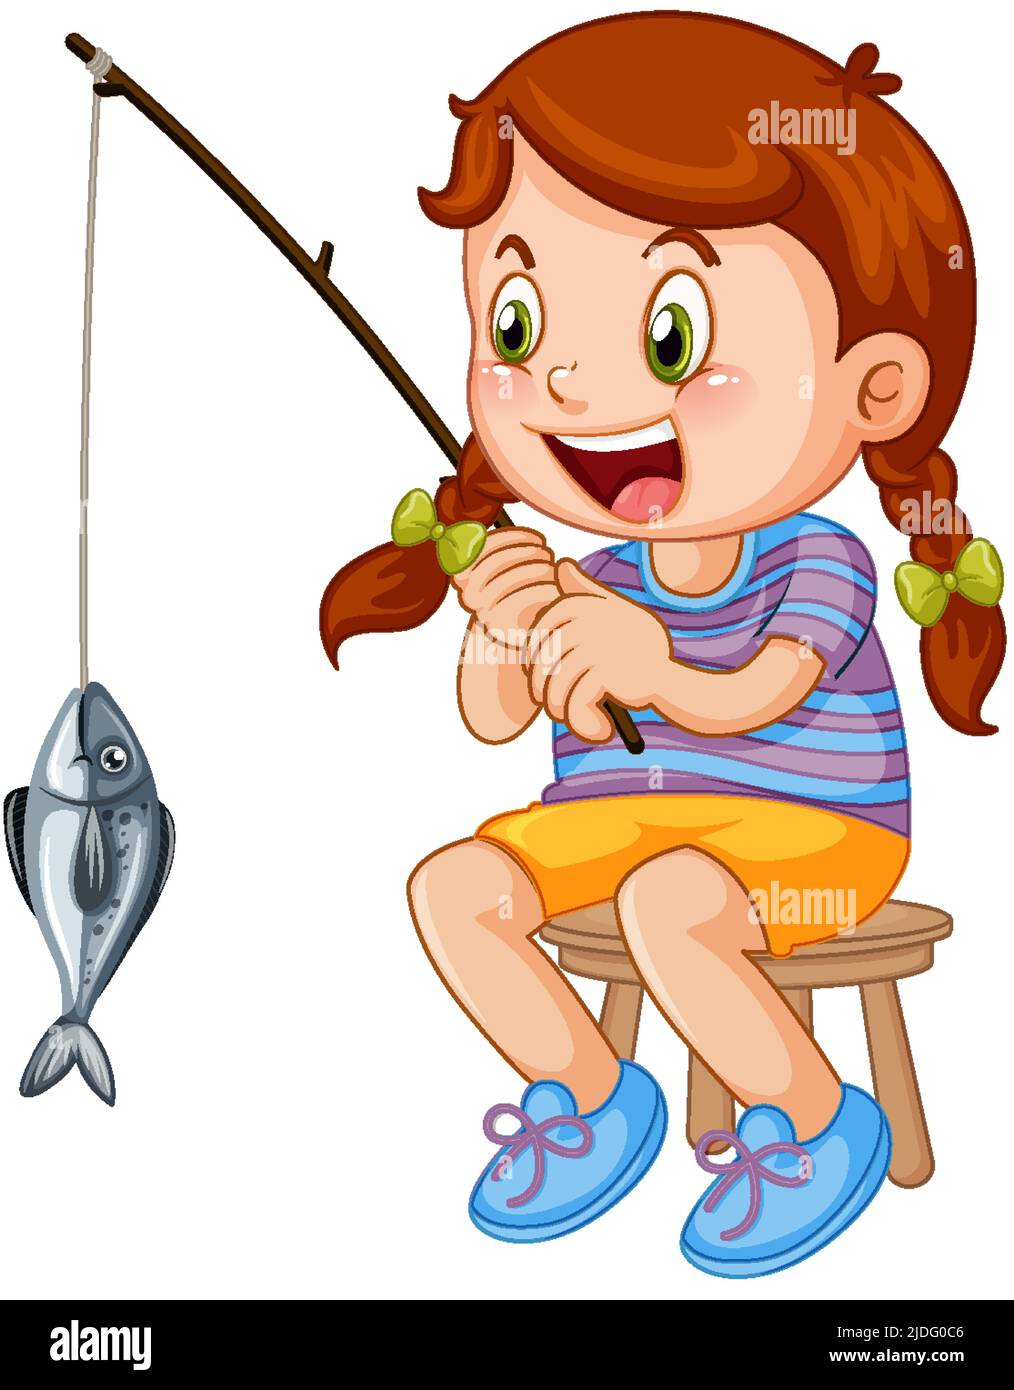 Small child fishing Cut Out Stock Images & Pictures - Alamy